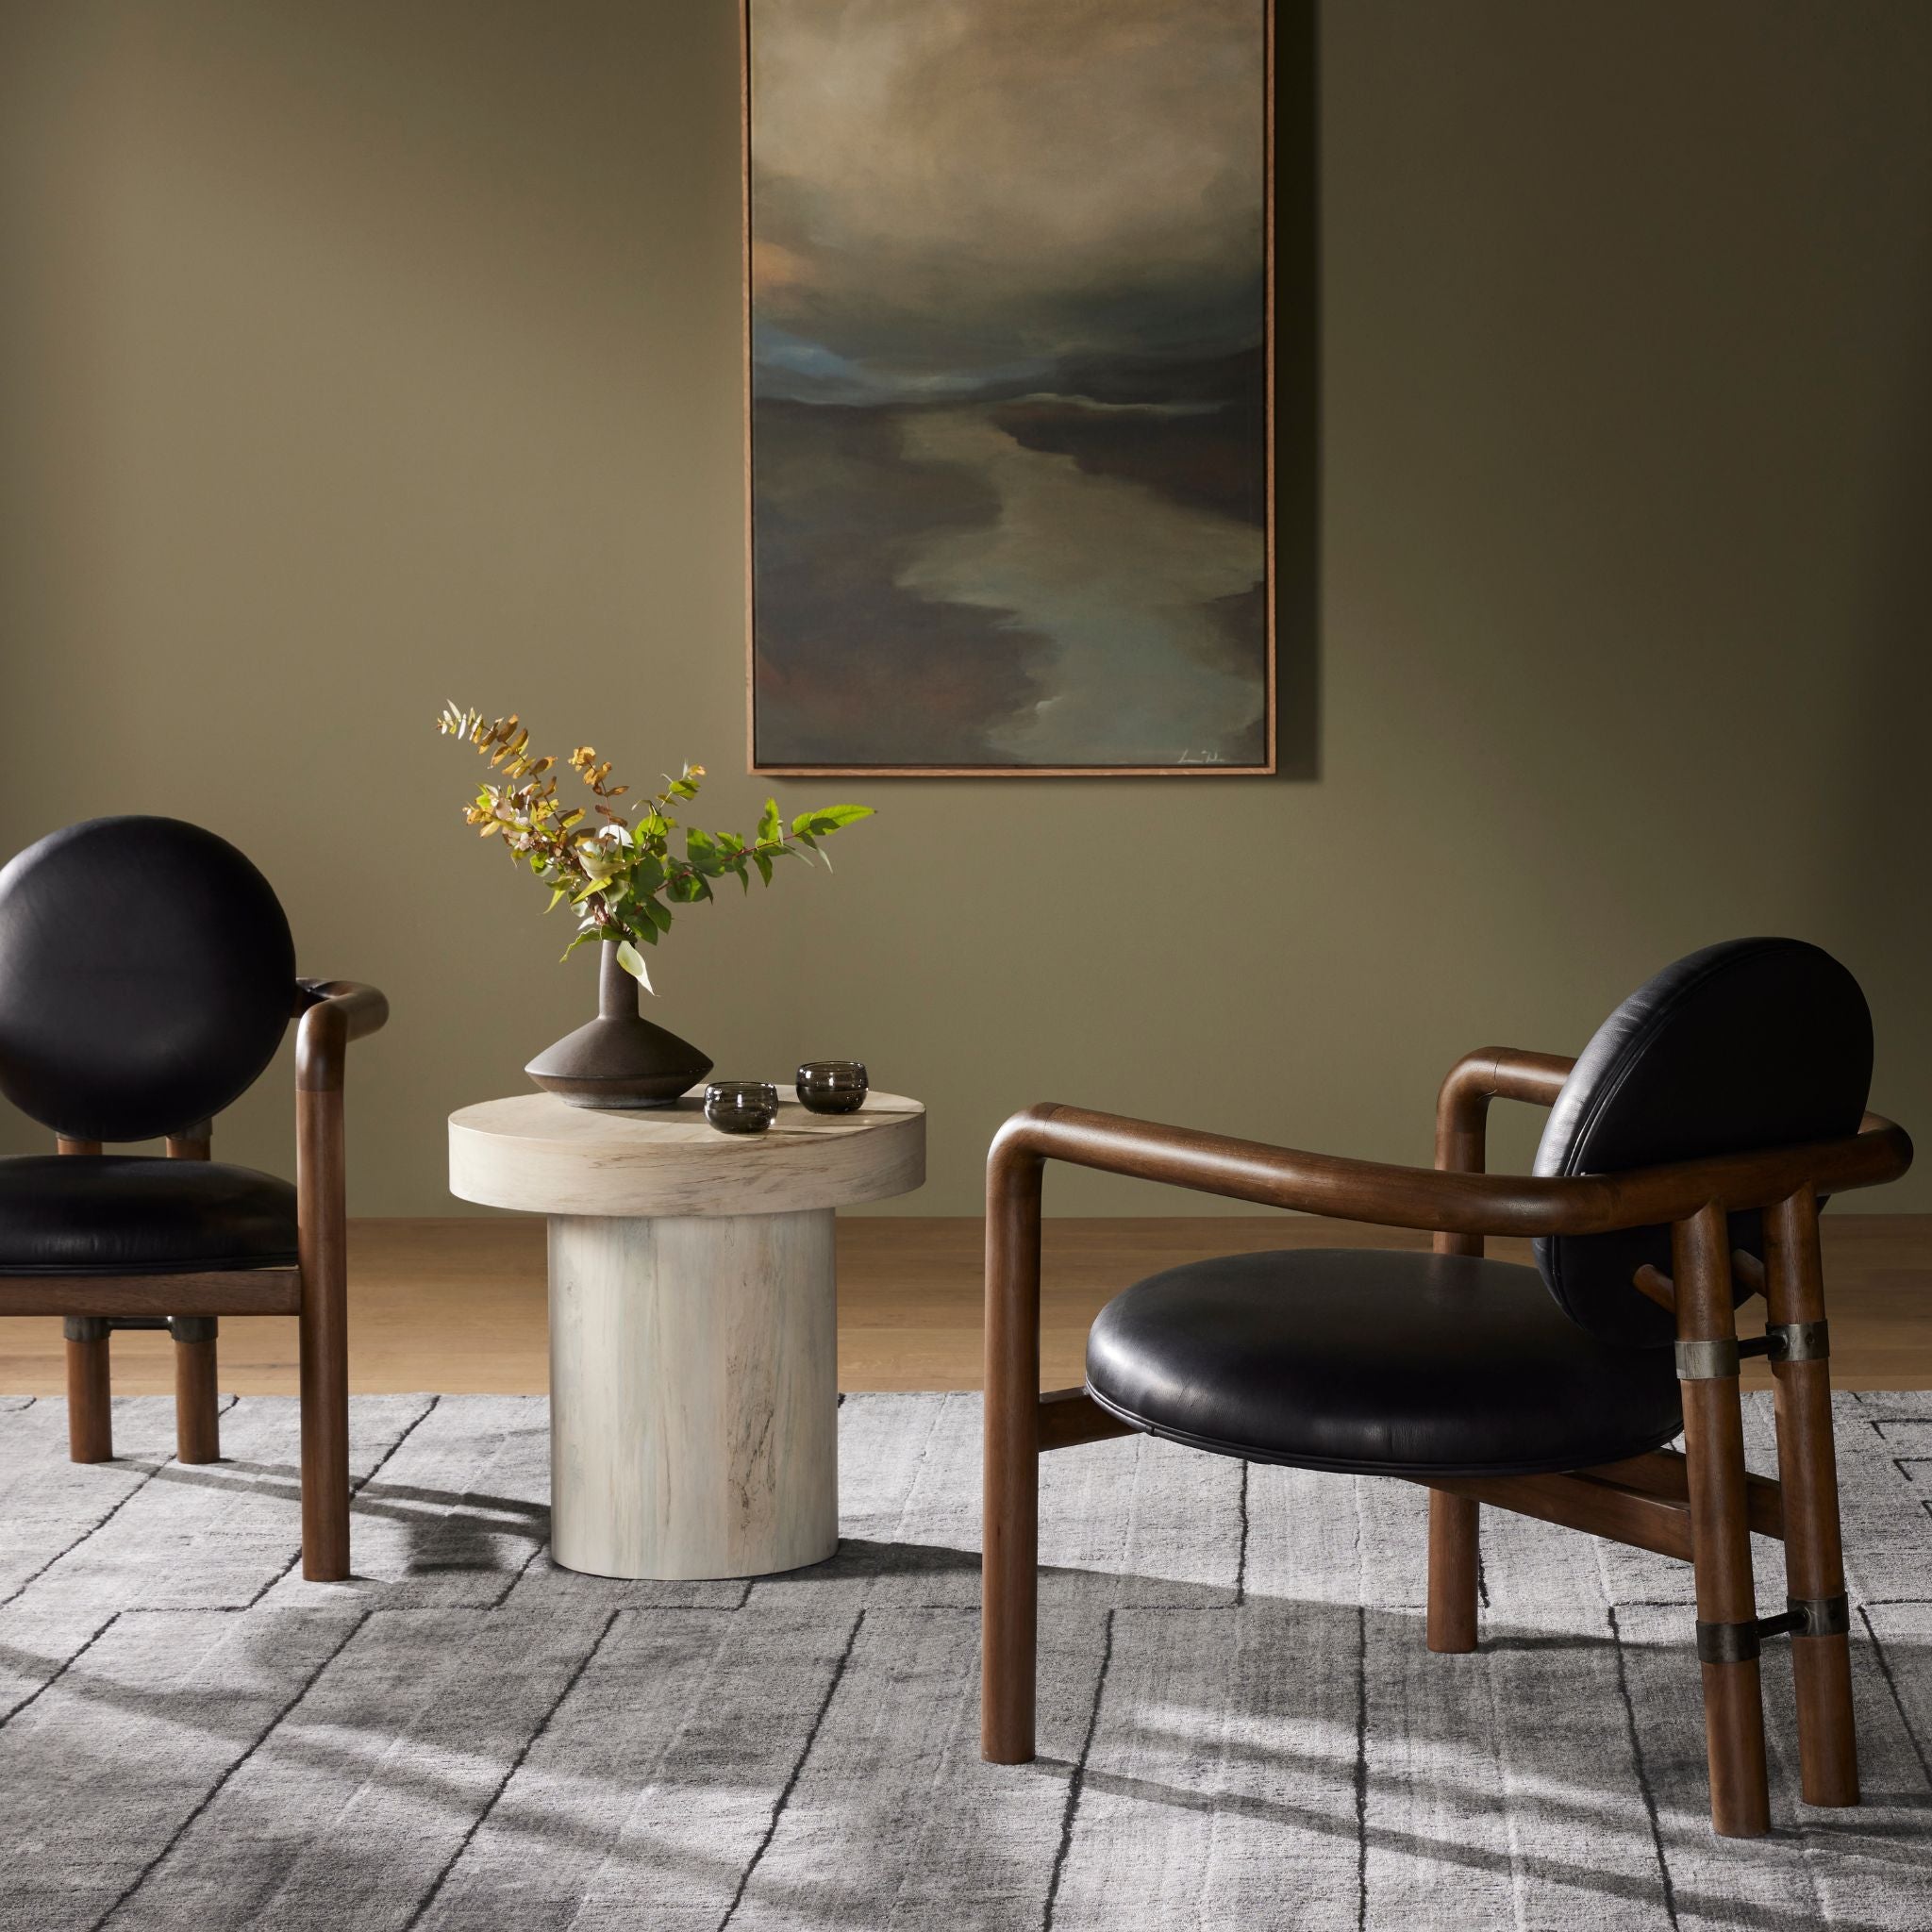 SIMPLY ELEVATED - Elevated your living space with our playful and captivating Bria Chair, a modern interpretation of Italian design. Crafted from solid parawood, this chair showcases a slim, curved frame and a rear mock-tripod, adding a touch of whimsy to its overall aesthetic. 